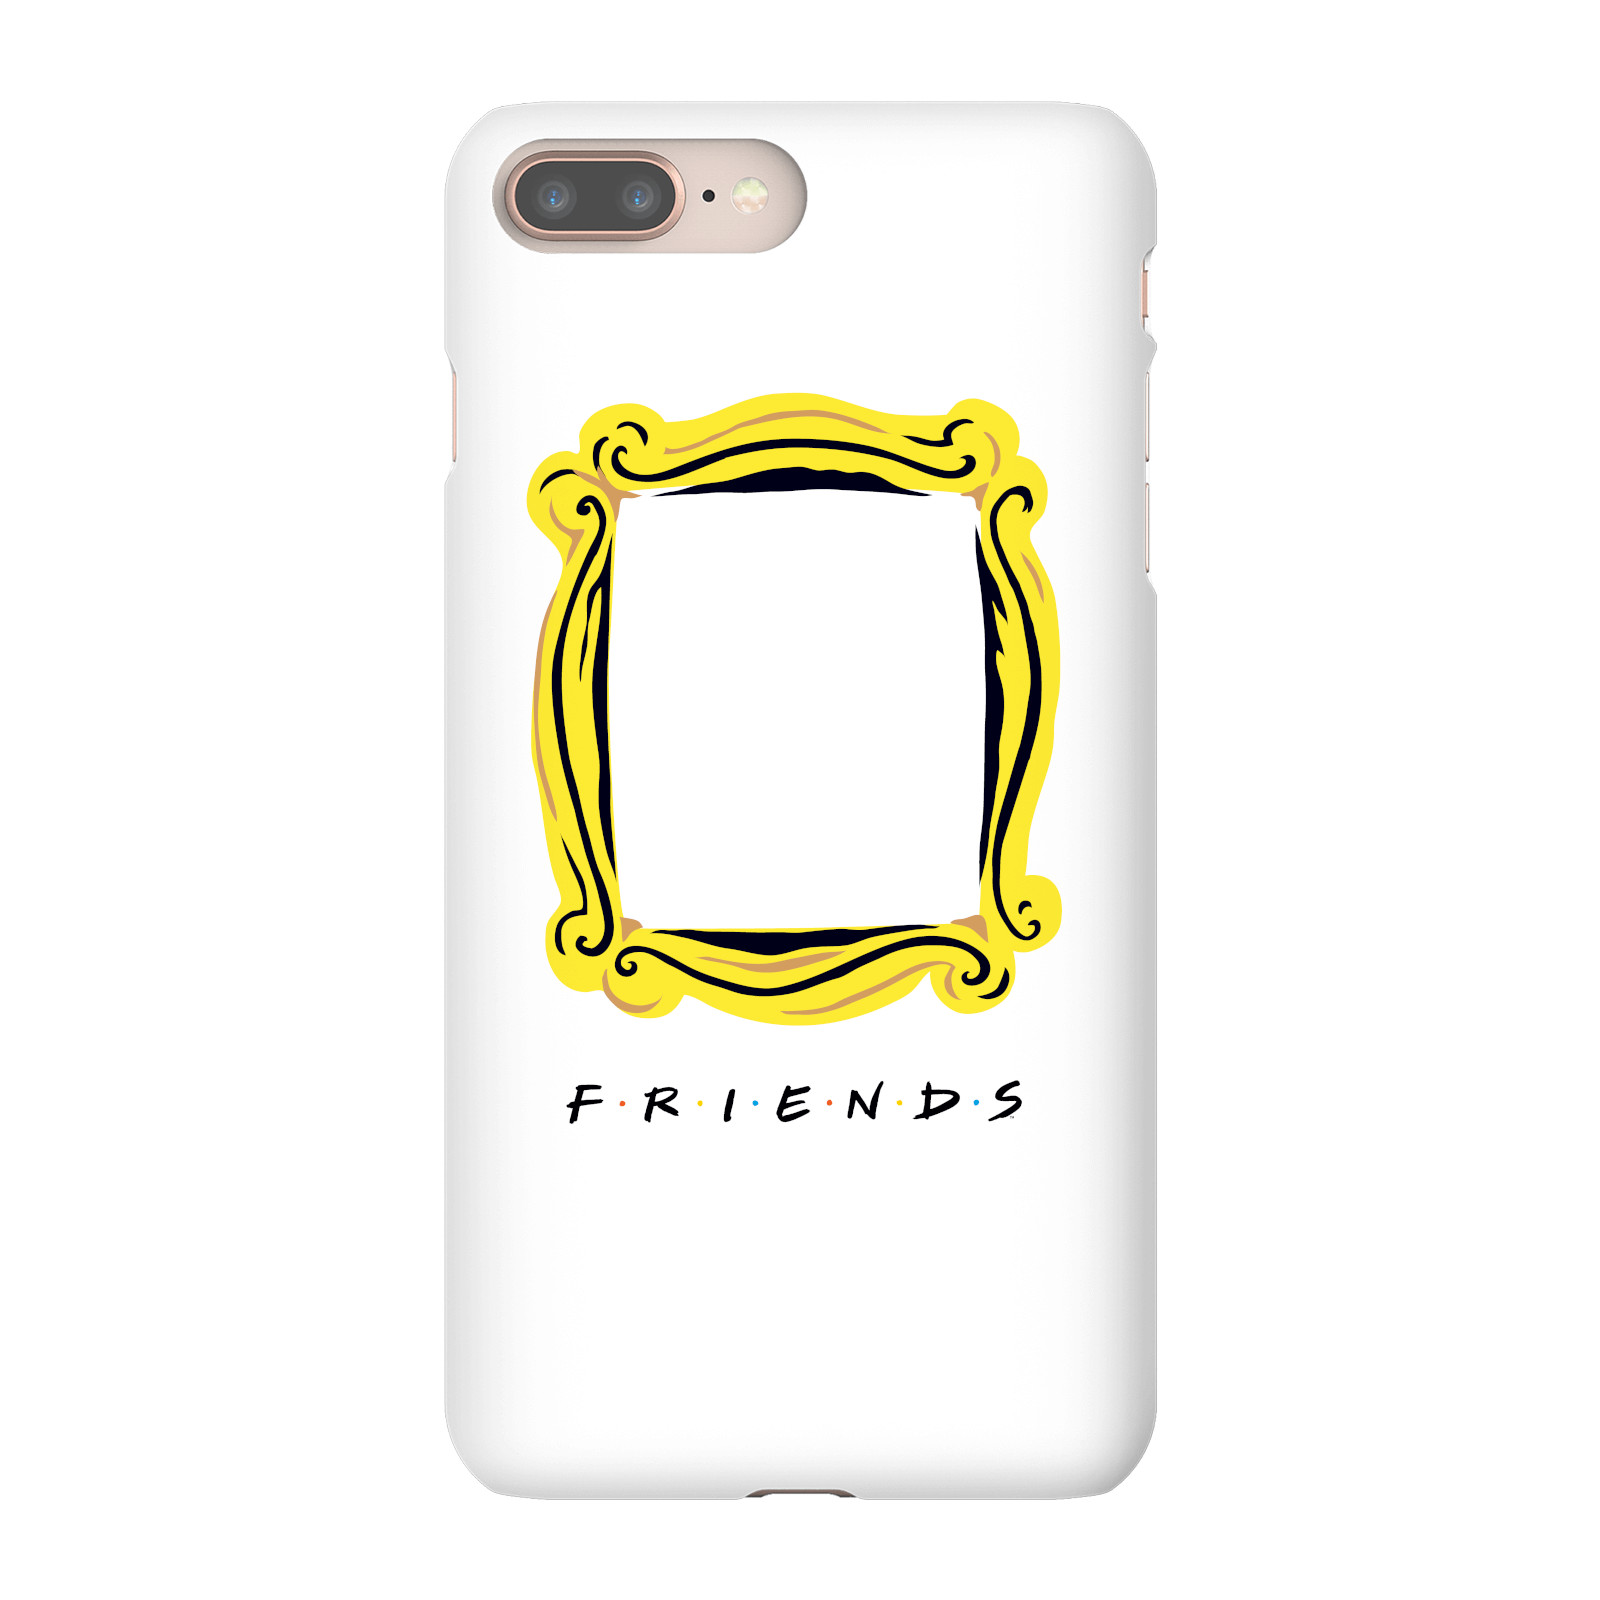 Photos - Case Frame Friends  Phone  for iPhone and Android - iPhone 6 Plus - Snap Cas 